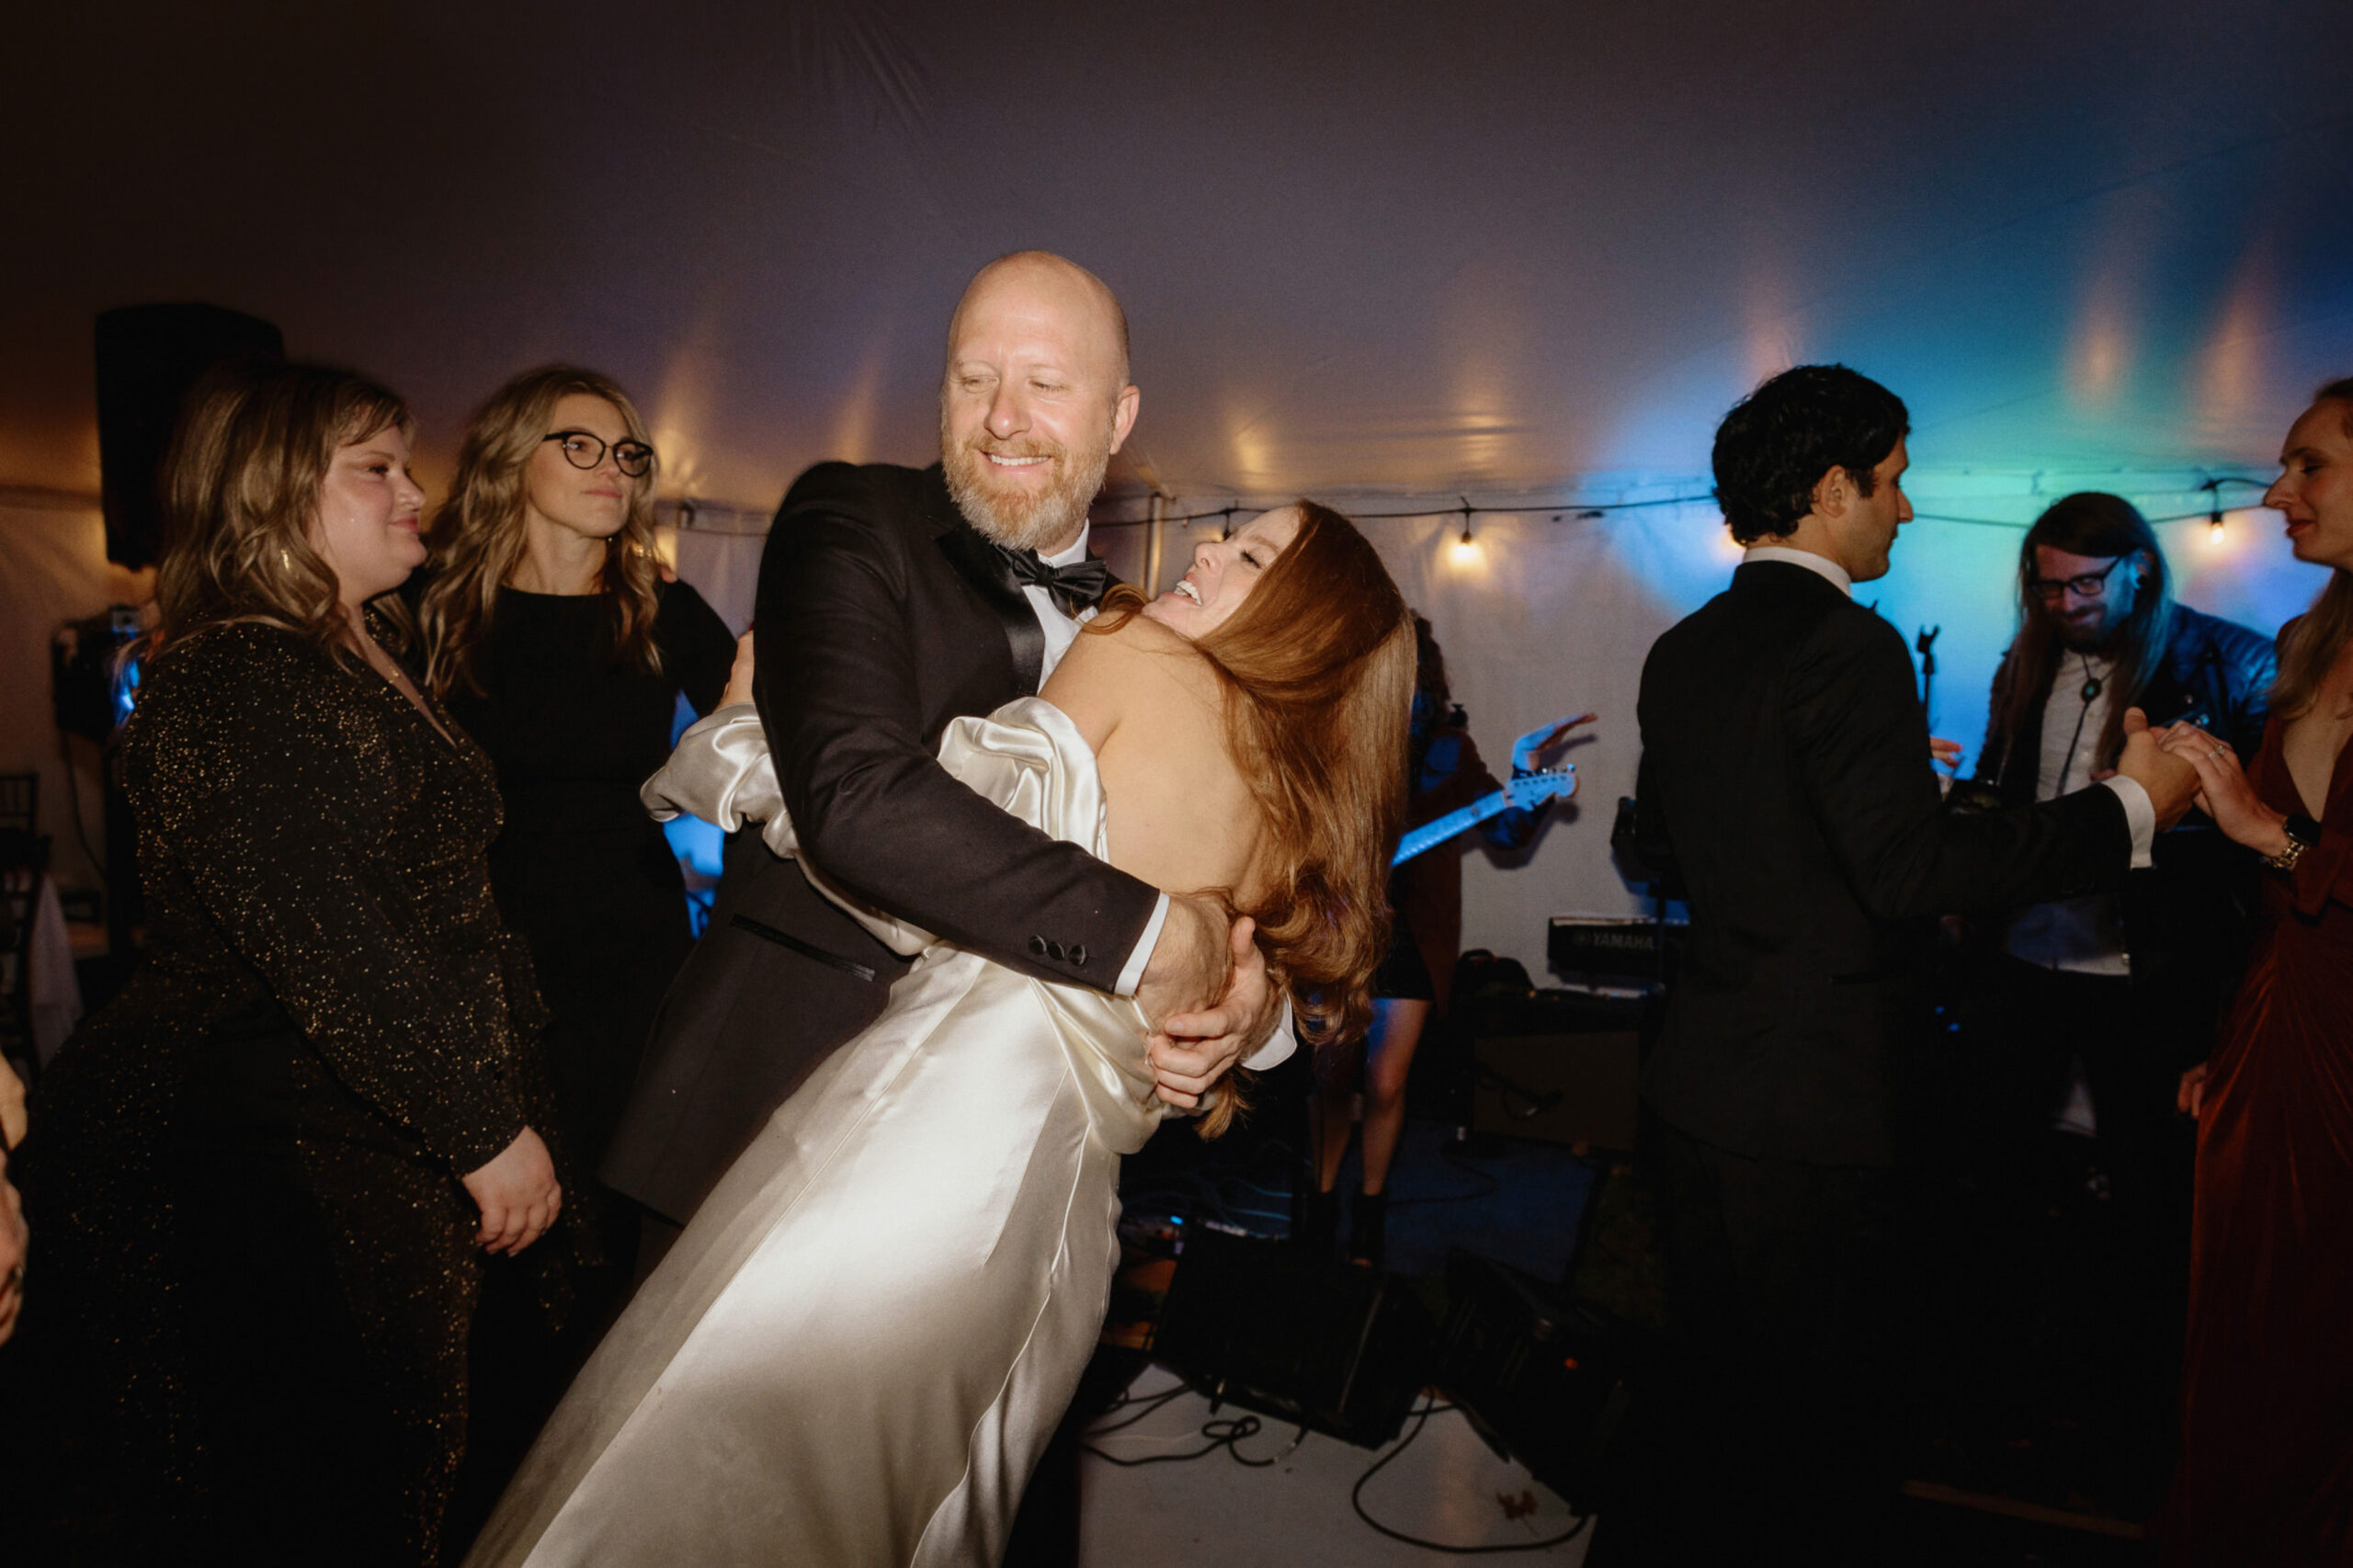 The newlyweds and the guests are having fun dancing on the dance floor. Unposed wedding photos by Jenny Fu Studio 